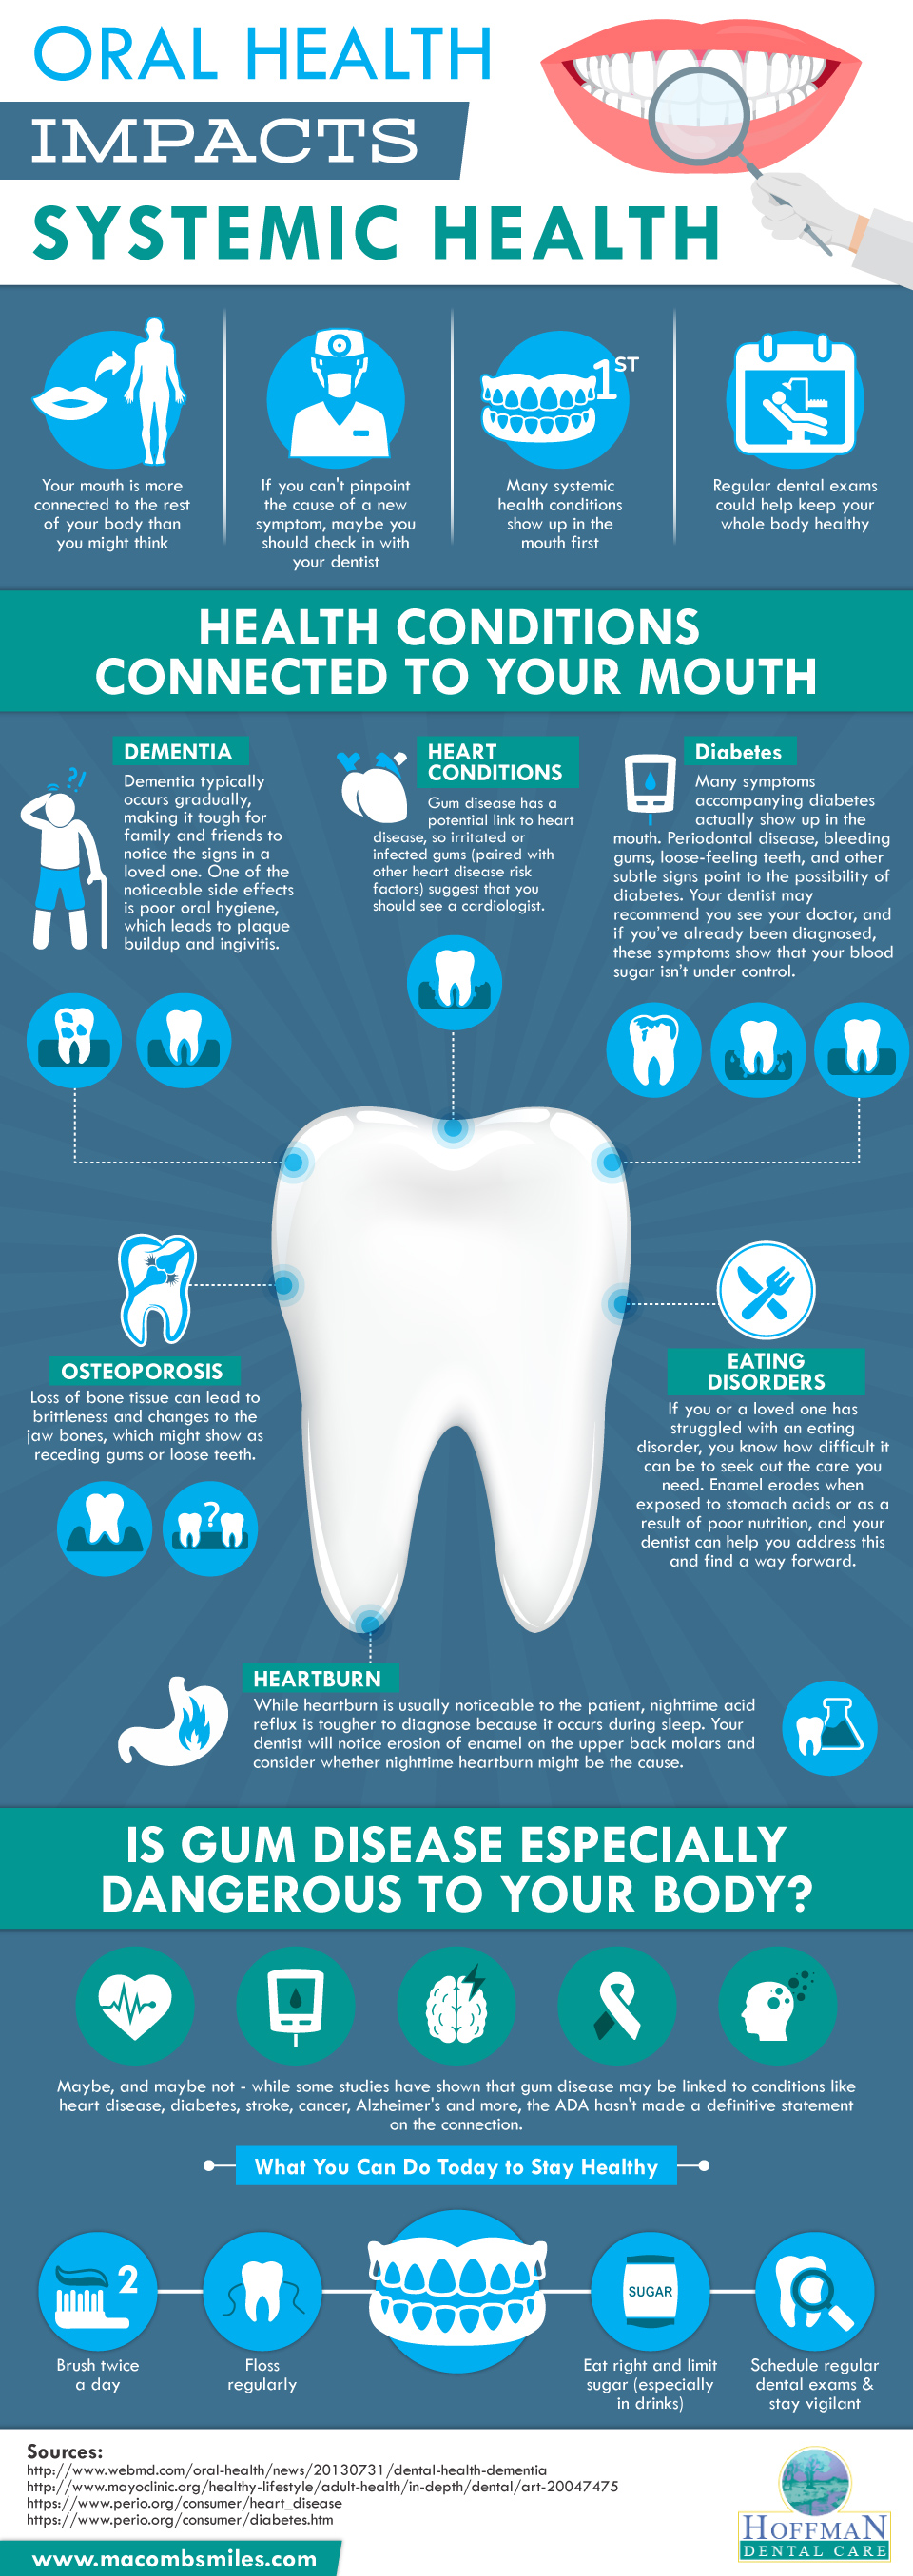 infographic about how oral health impacts systemic health